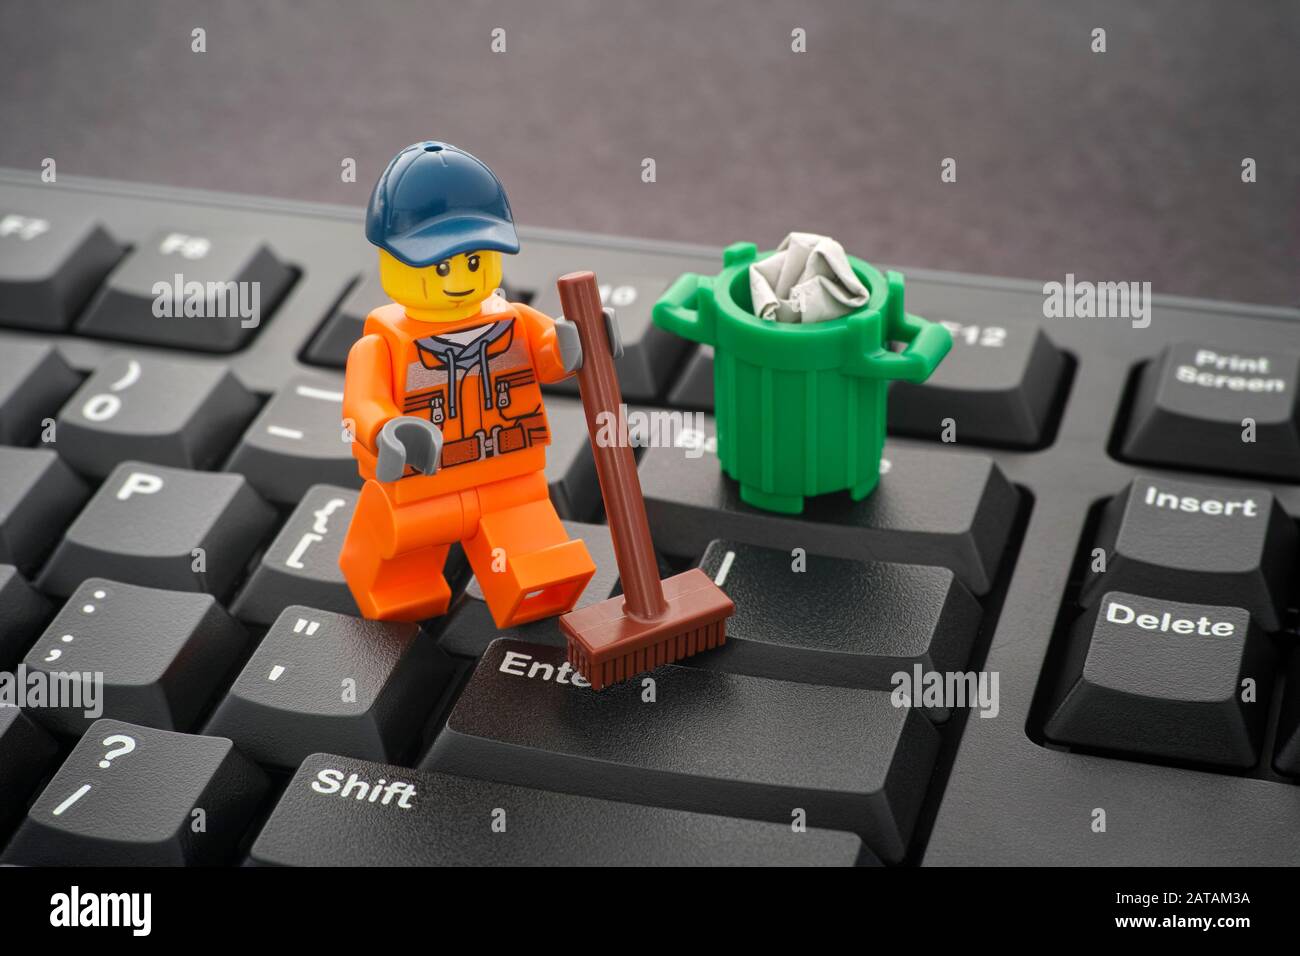 Tambov, Russian Federation - January 24, 2020 Lego minifigure cleaning keyboard with a broom. Stock Photo